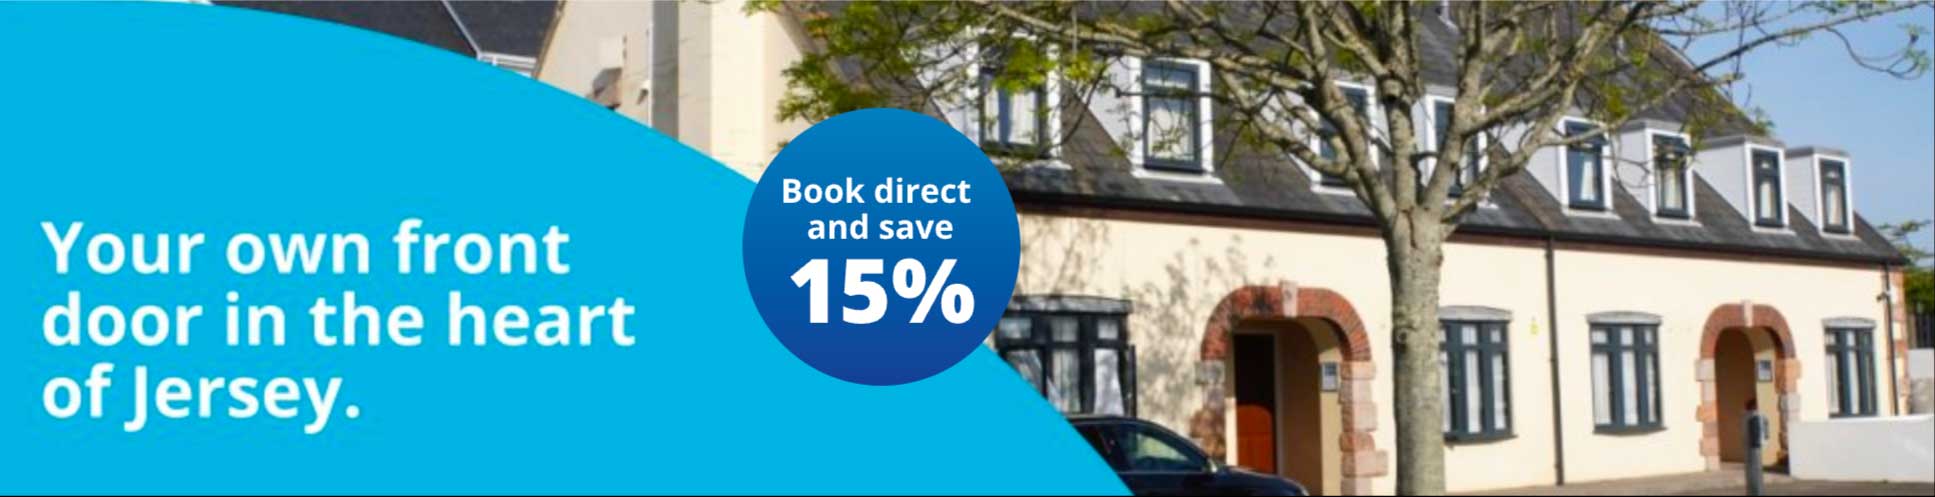 Book direct and Save 15%